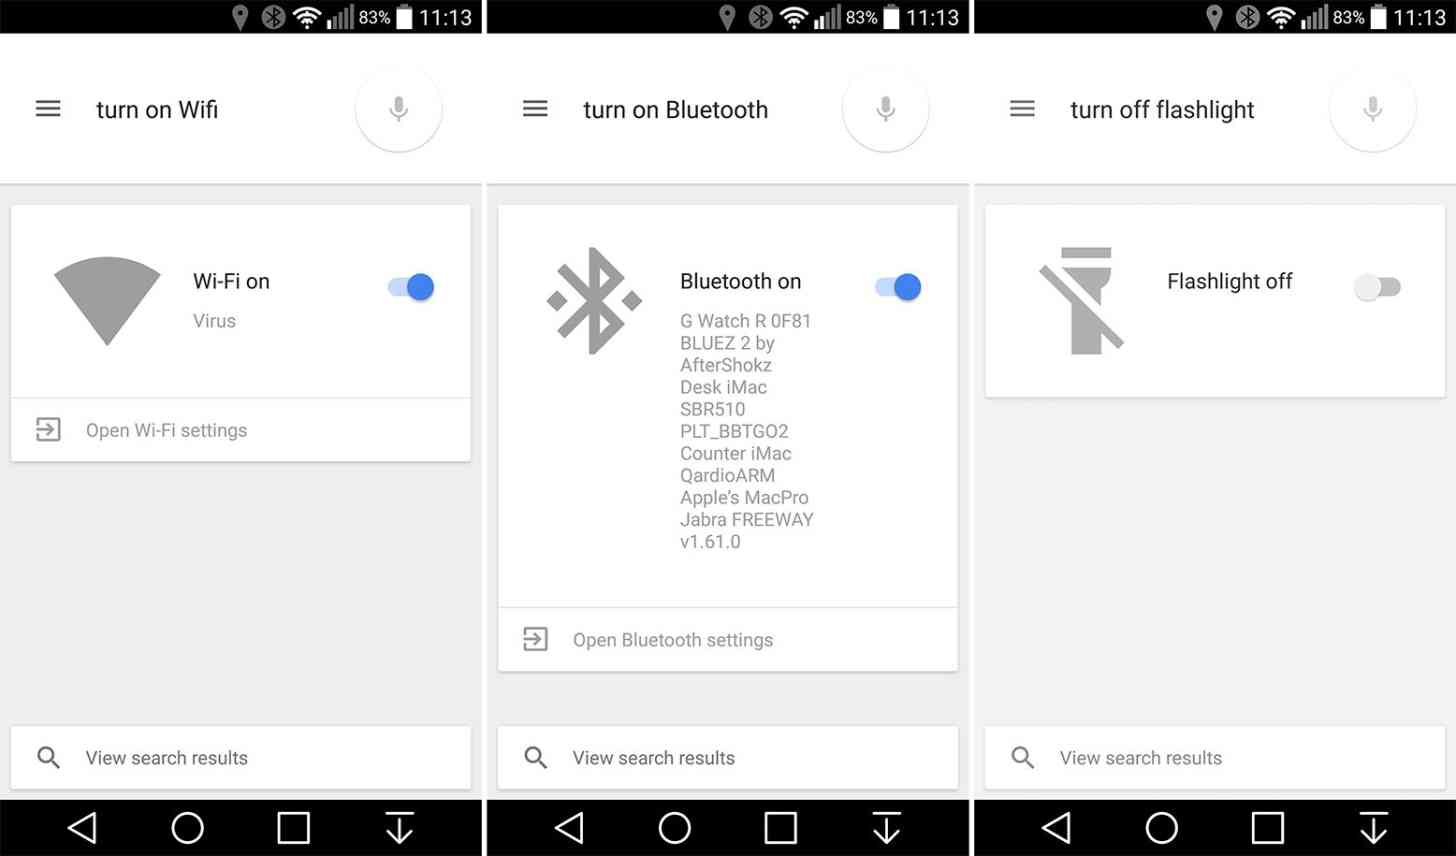 Google Search Wi-Fi, Bluetooth, flashlight Android 5.0 voice toggles